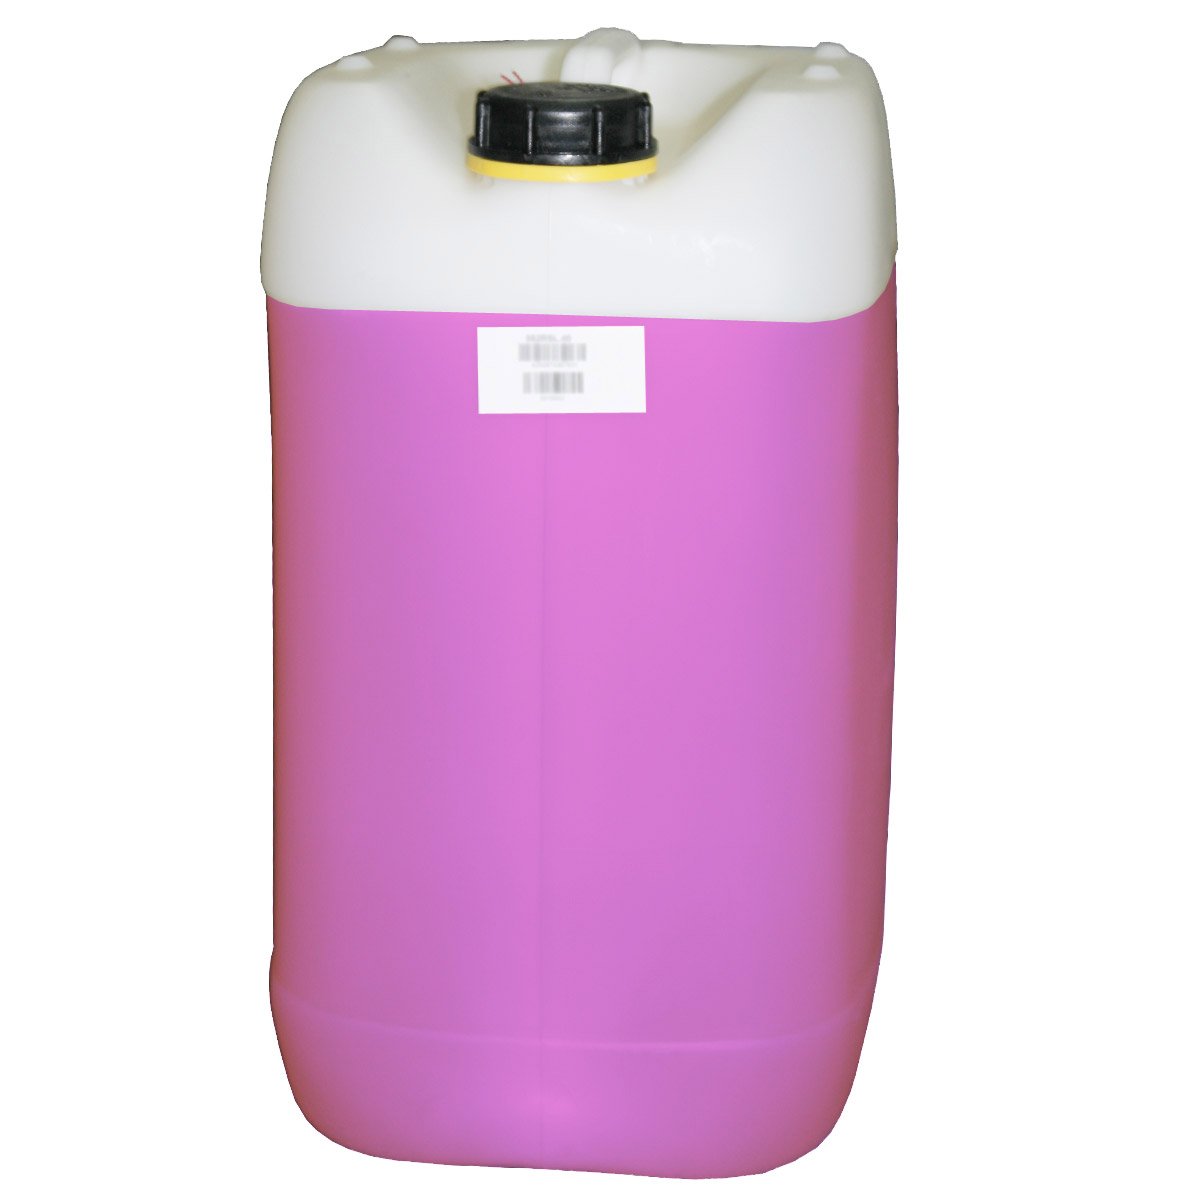 Cleaning fluid for print heads - pink, outside